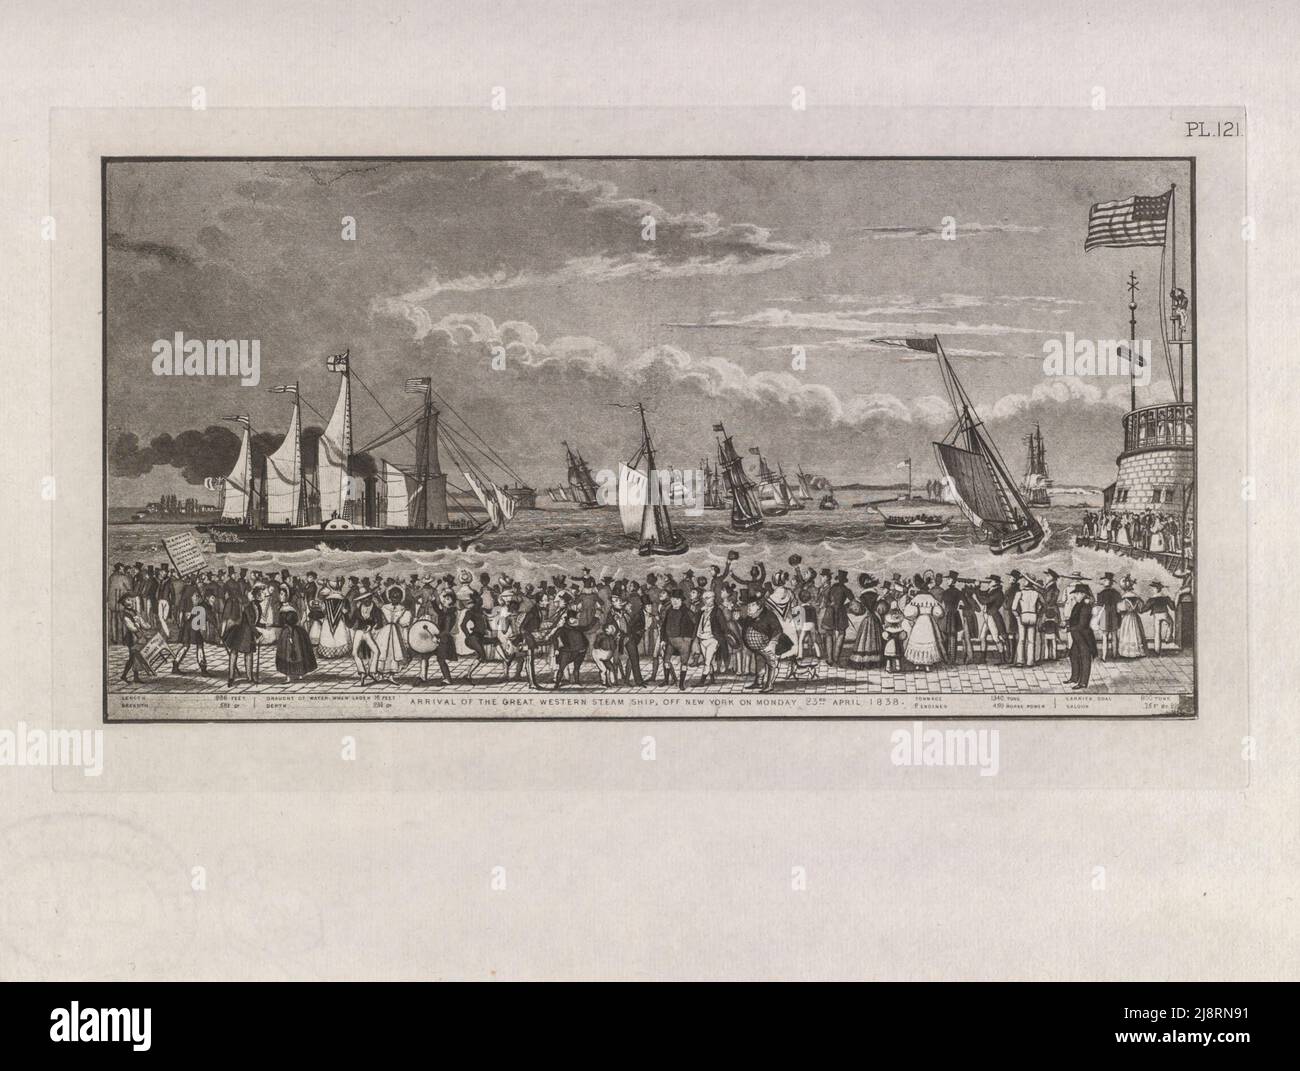 ARRIVAL OF THE GREAT WESTERN STEAM SHIP, Off New YorK on Monday, 23rd April 1838 The iconography of Manhattan Island, 1498-1909 compiled from original sources and illustrated by photo-intaglio reproductions of important maps, plans, views, and documents in public and private collections - Volume 3 by Isaac Newton Phelps Stokes, Publisher New York : Robert H. Dodd 1918 Stock Photo